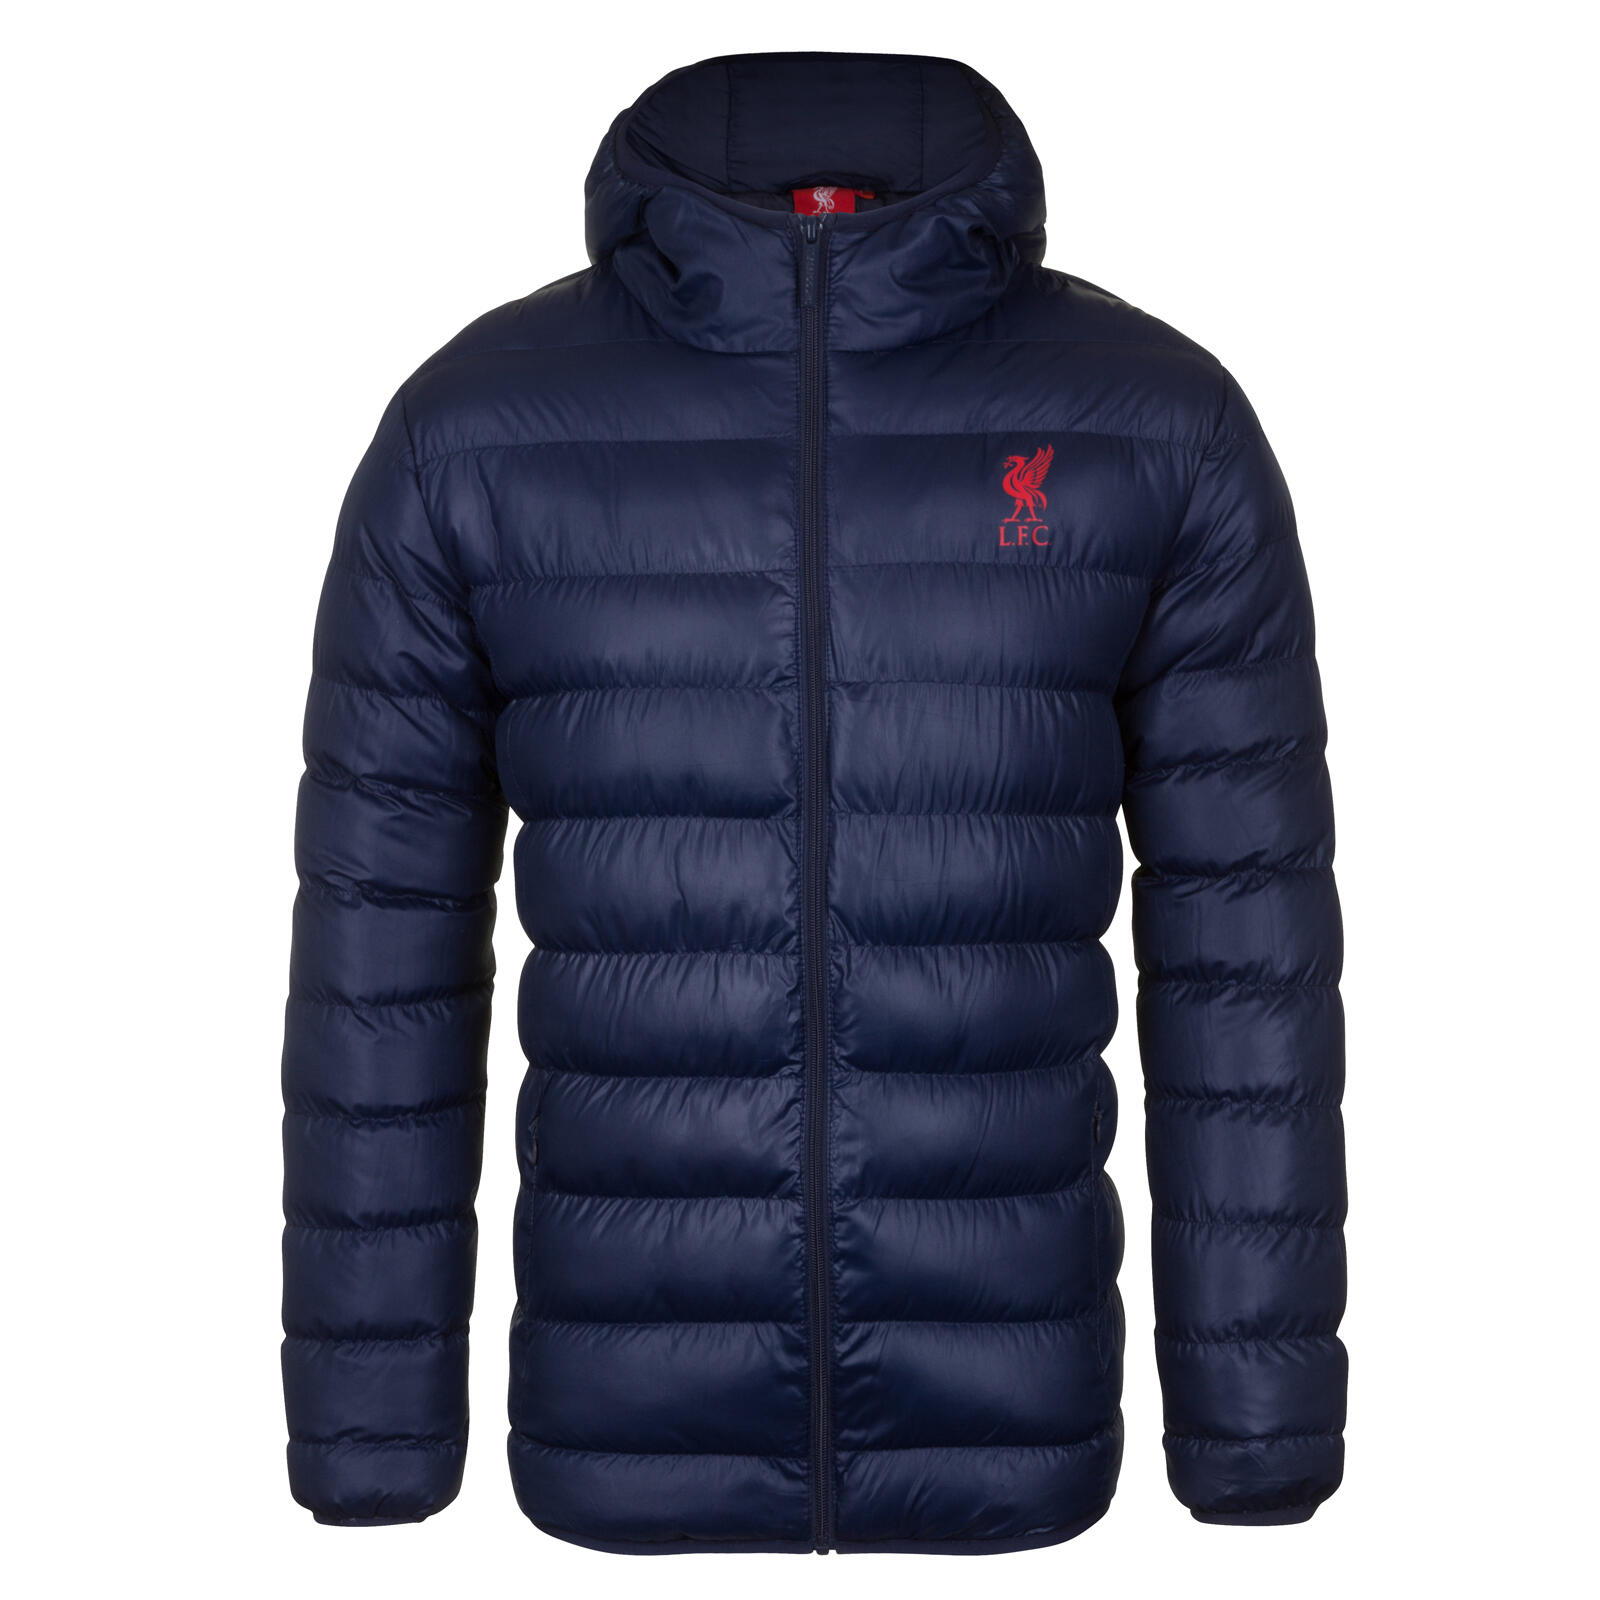 Liverpool FC Mens Jacket Hooded Winter Quilted OFFICIAL Football Gift 1/5